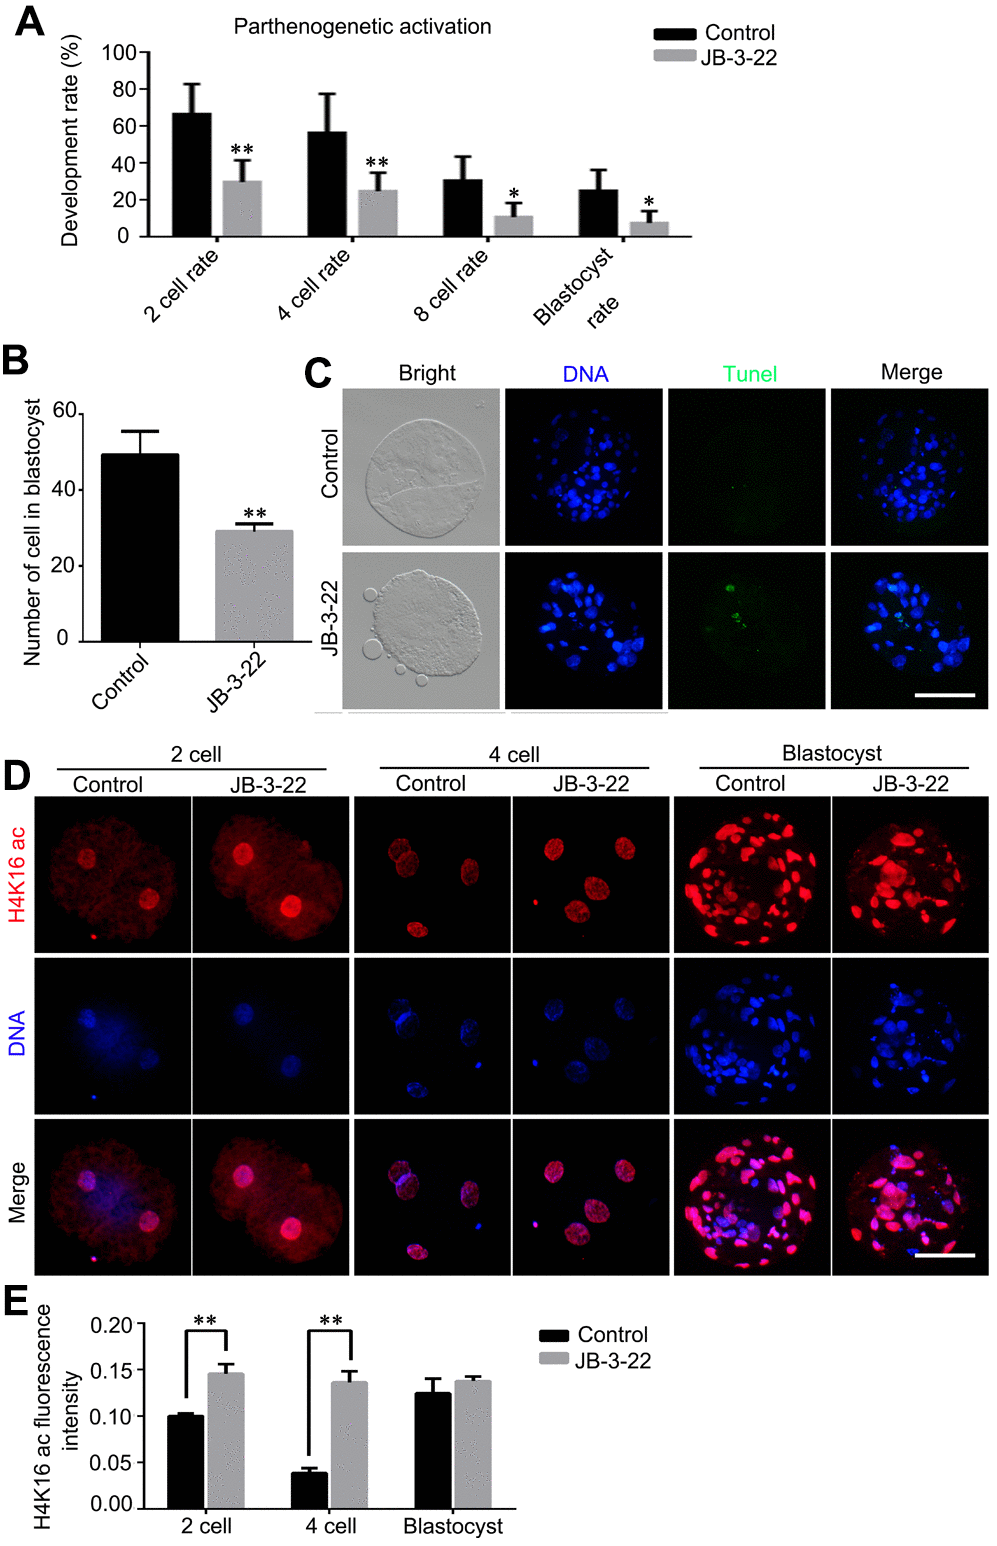 JB-3-22 promoted the apoptosis of porcine oocytes and disrupted the subsequent embryonic development of porcine oocytes after parthenogenetic activation. (A) The rates of different development stage embryos were recorded in control and JB-3-22 treated oocytes after parthenogenetic activation. (B) Images of apoptotic cells in blastocysts in control and JB-3-22 treated group respectively. (C) The statistics of total cell number in per blastocyst. (D) Images of H4K16 acetylation at different stages of parthenogenetic embryo development in control and JB-3-22 group. (E) The fluorescence intensity of H4K16 acetylation. The results represent the mean ± standard deviation of three independent experiments. * P 